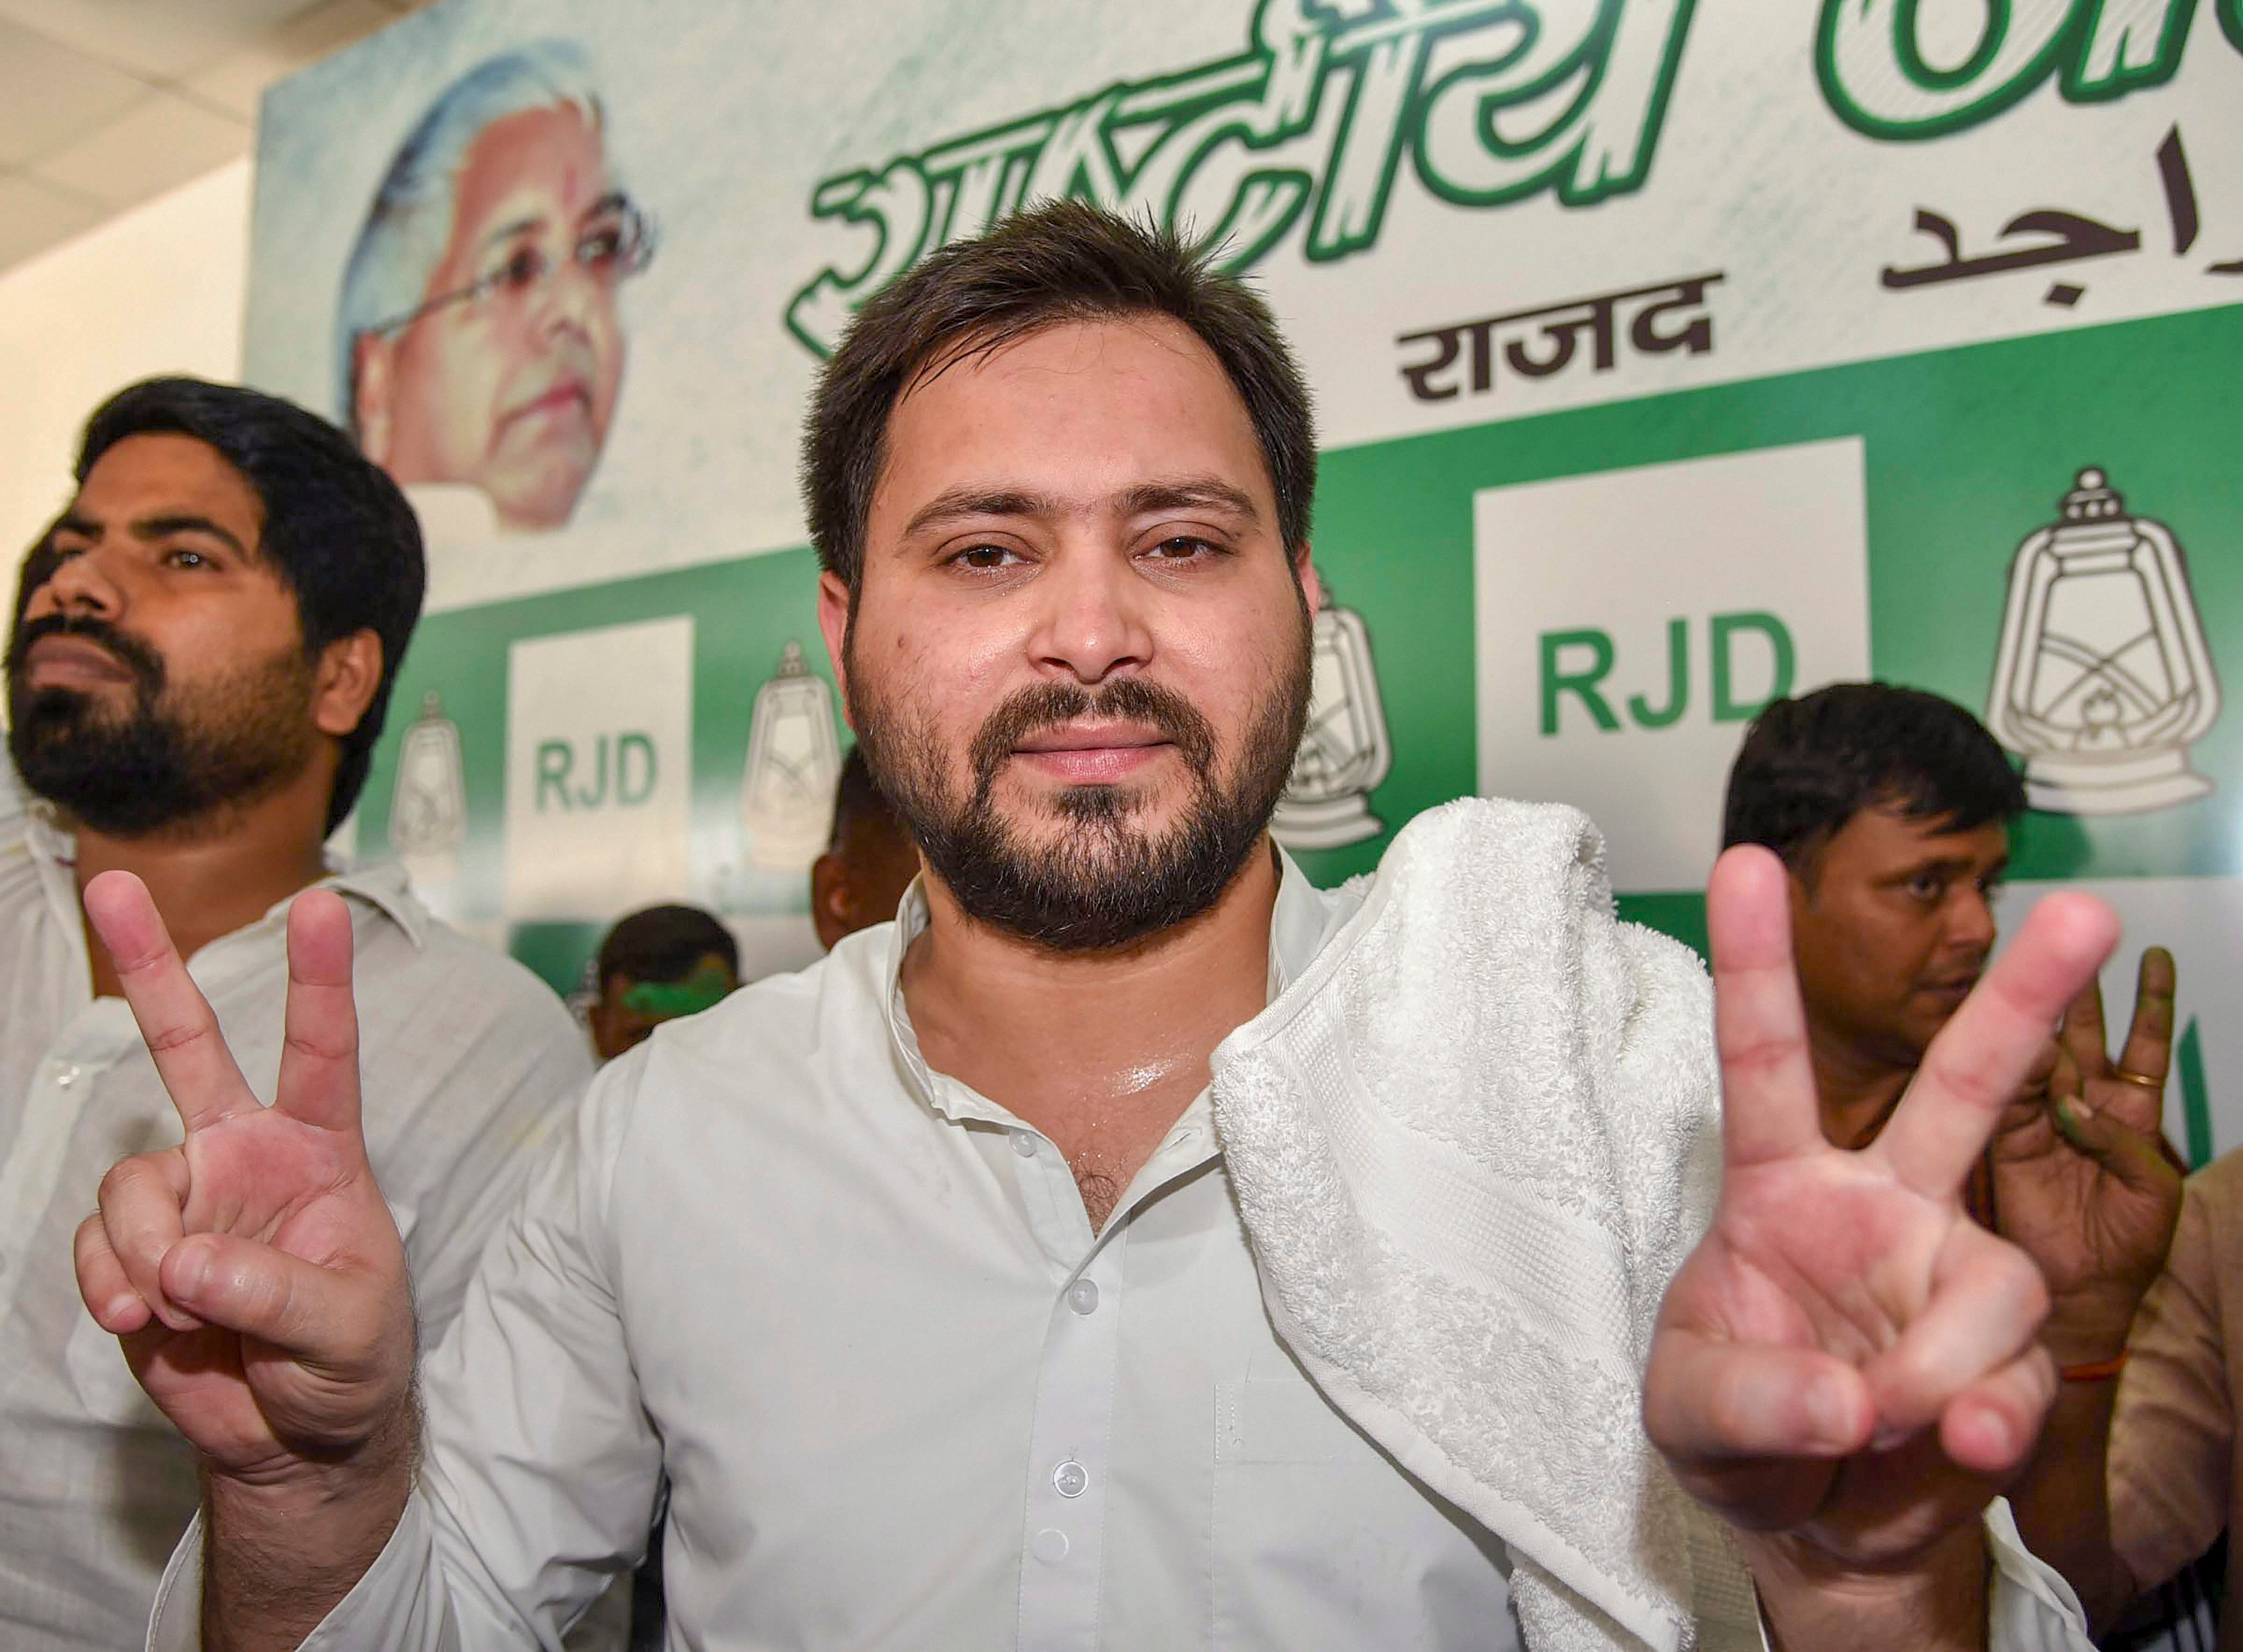 RJD leader Tejaswi Yadav flashes the victory sign after the party's victory in Jokihat Assembly by-polls, in Patna on Thursday. PTI